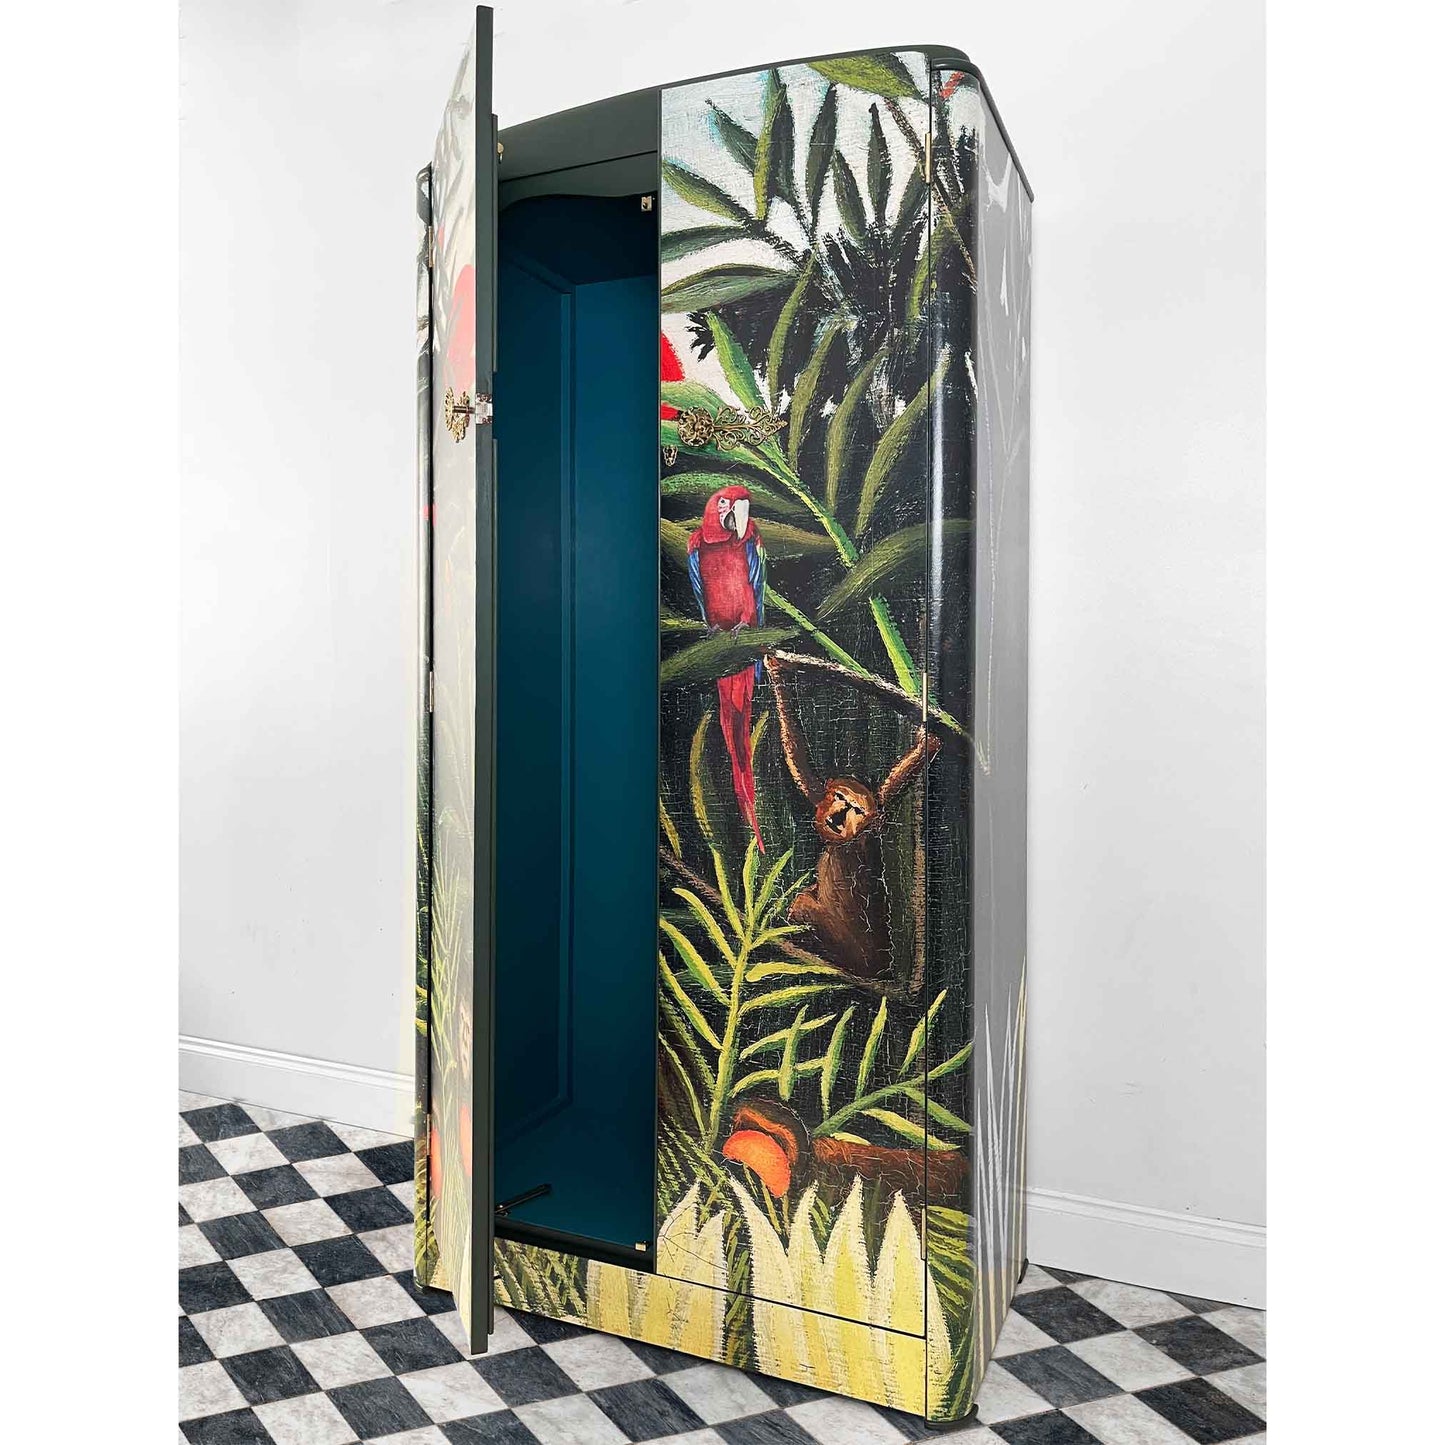 Vintage upcycled Art Deco wardrobe with tropical jungle design